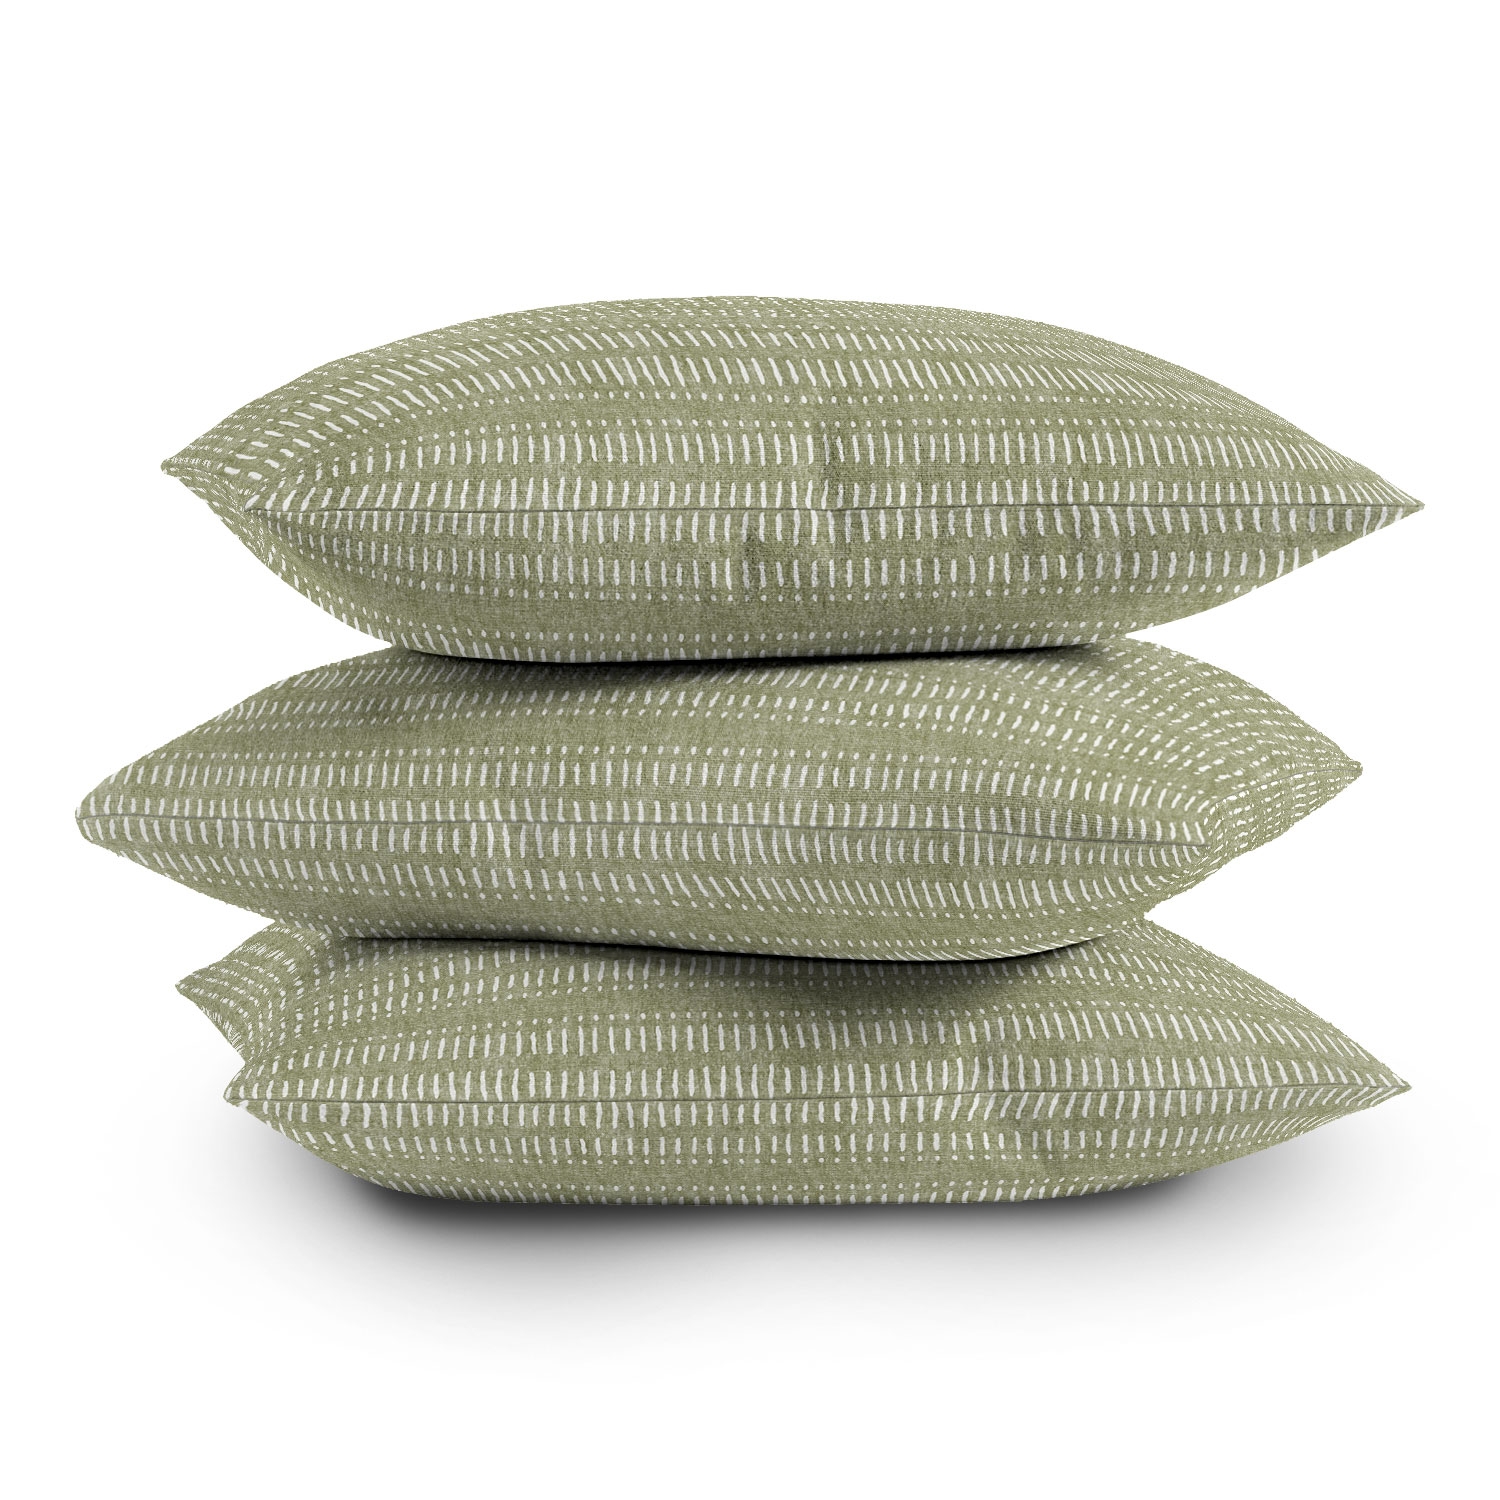 Dash Dot Stripes Olive by Little Arrow Design Co - Outdoor Throw Pillow 20" x 20" - Image 3